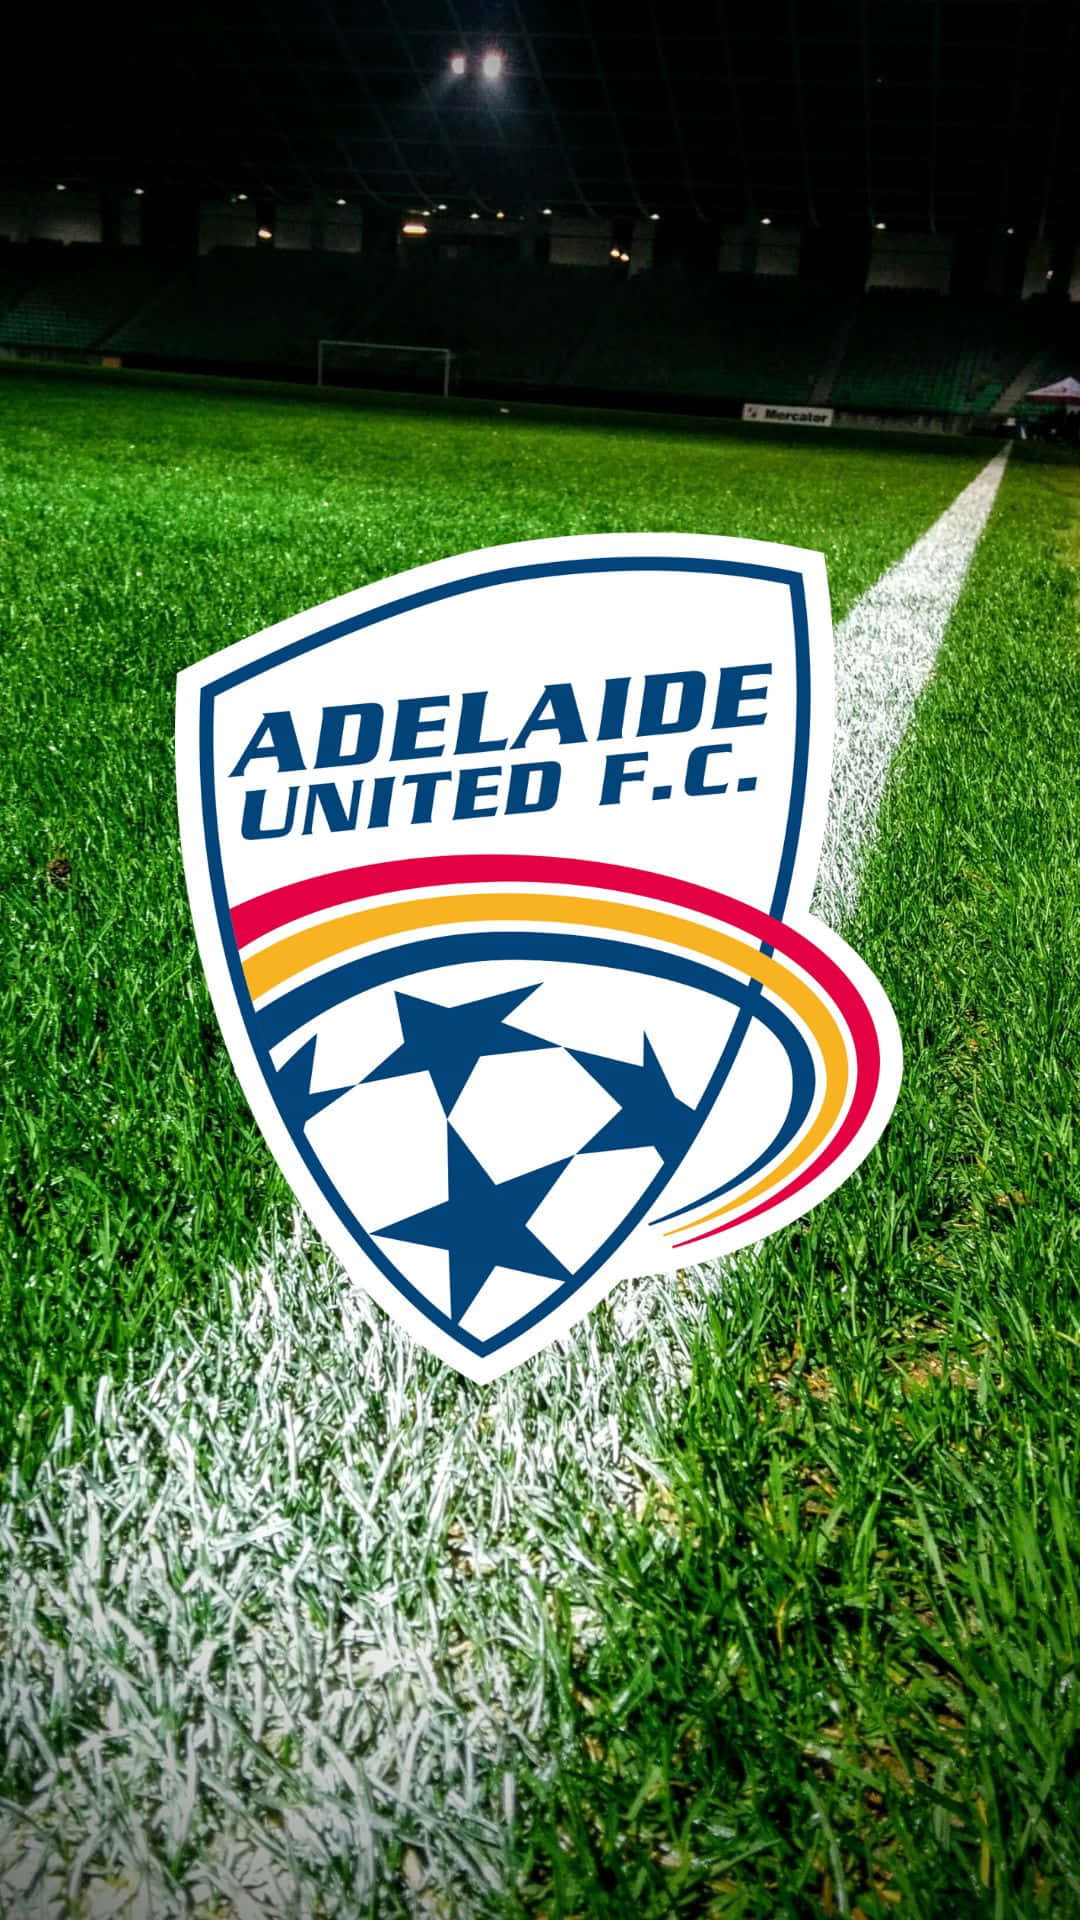 Adelaide United players celebrating a goal in action Wallpaper